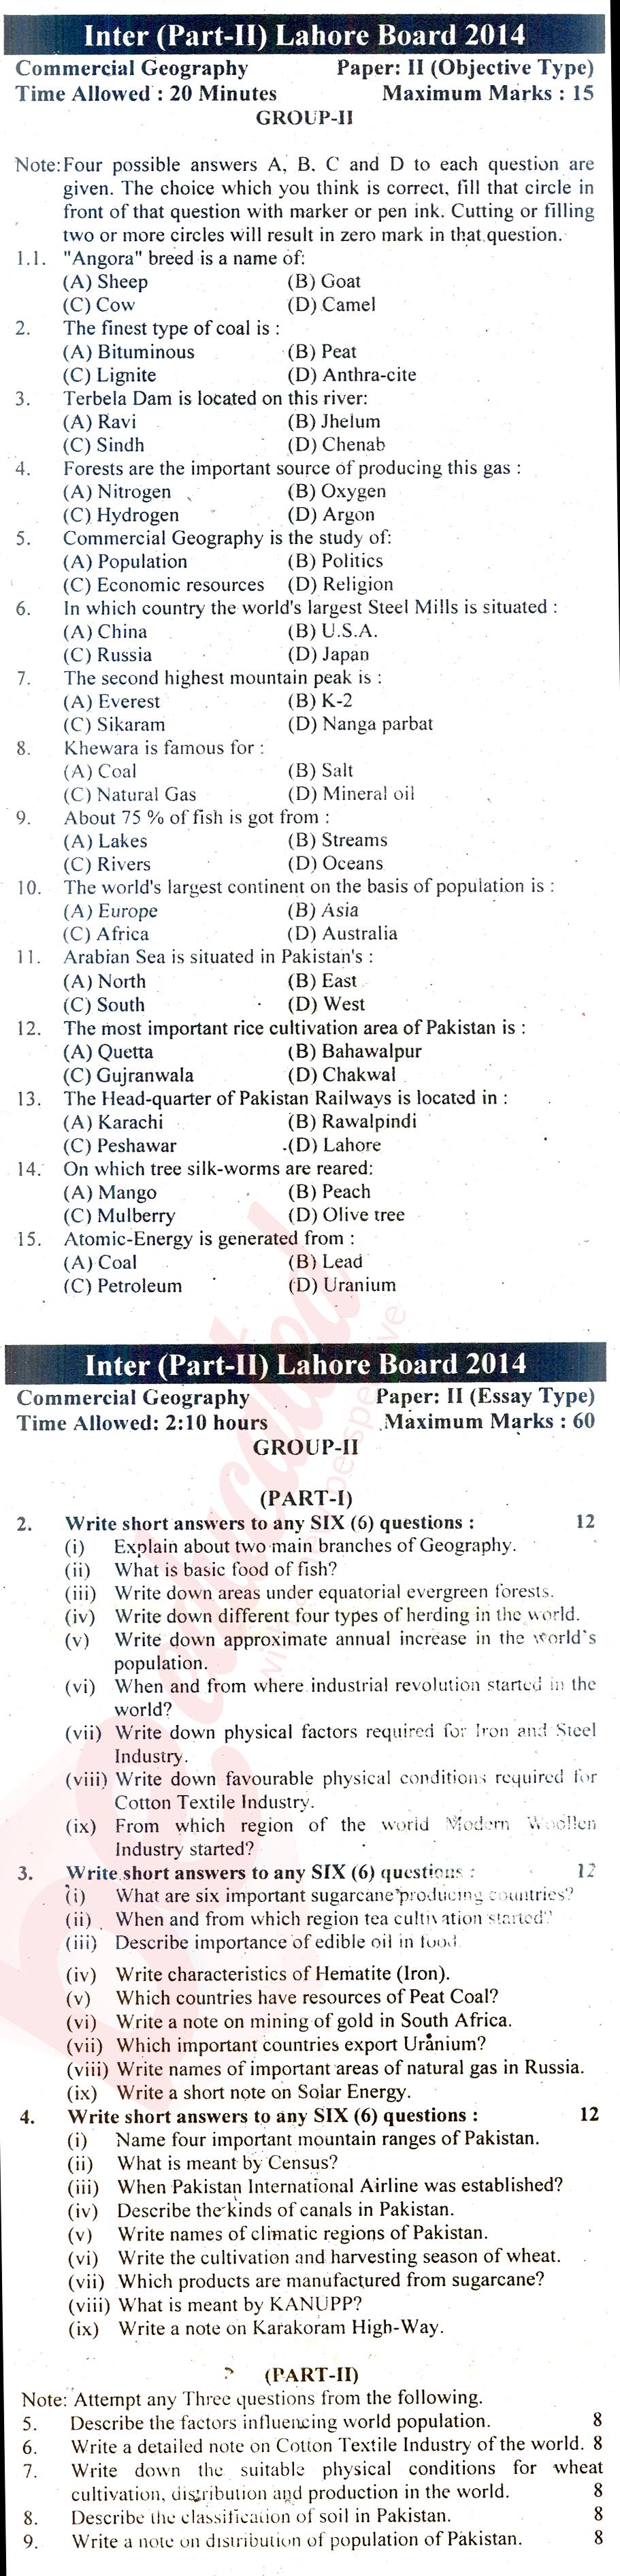 Commercial Geography ICOM Part 2 Past Paper Group 2 BISE Lahore 2014